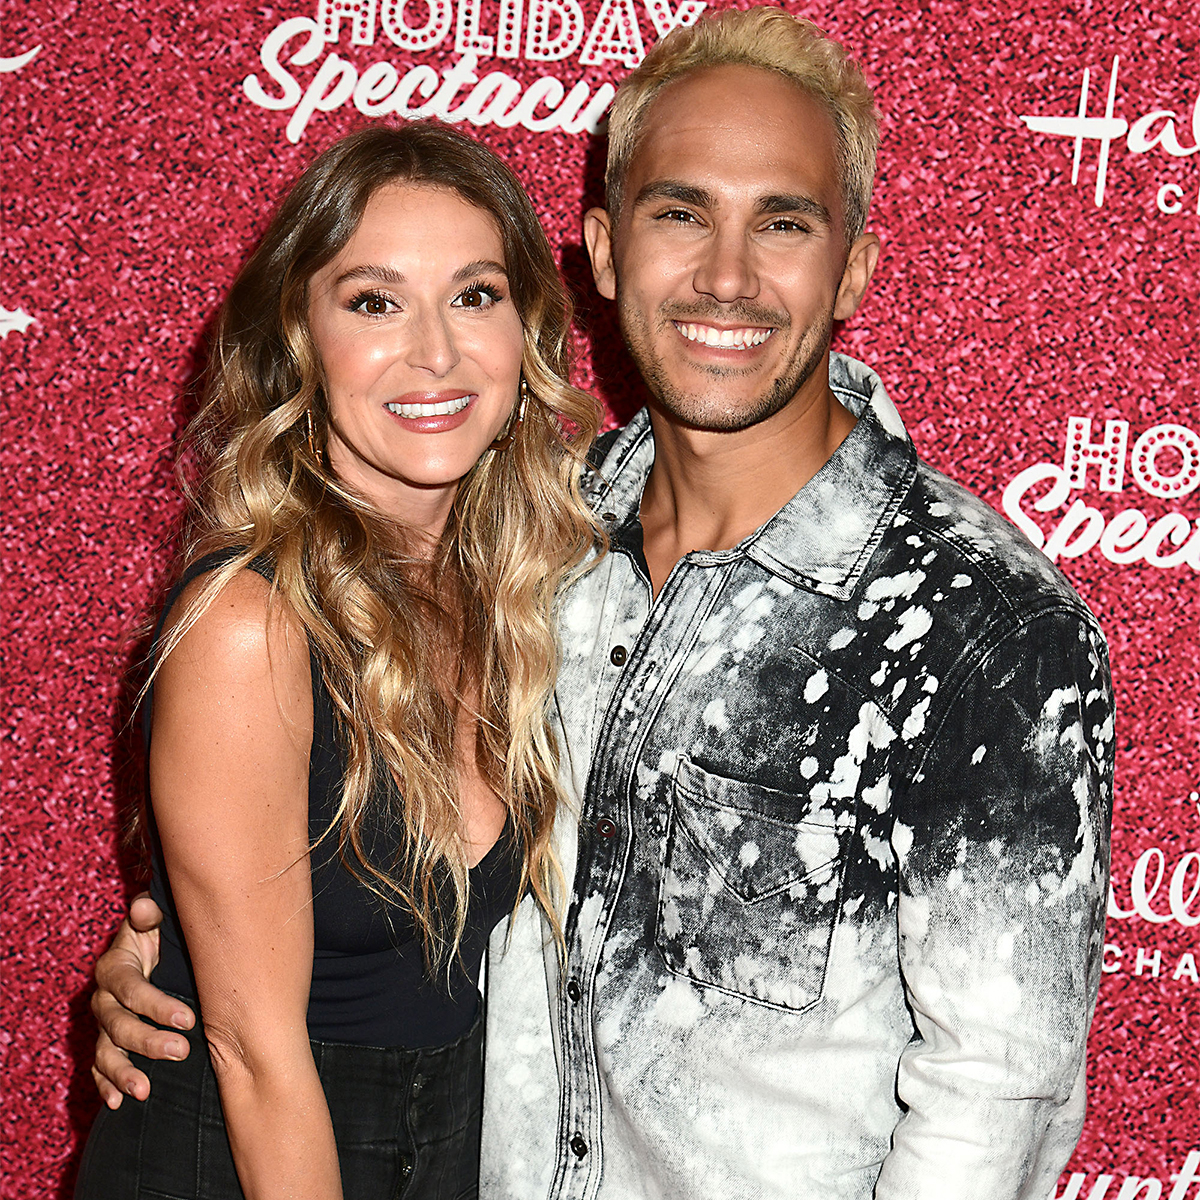 Why Alexa PenaVega Compared Sex With Husband Carlos to Going “to the Gym” – E! Online